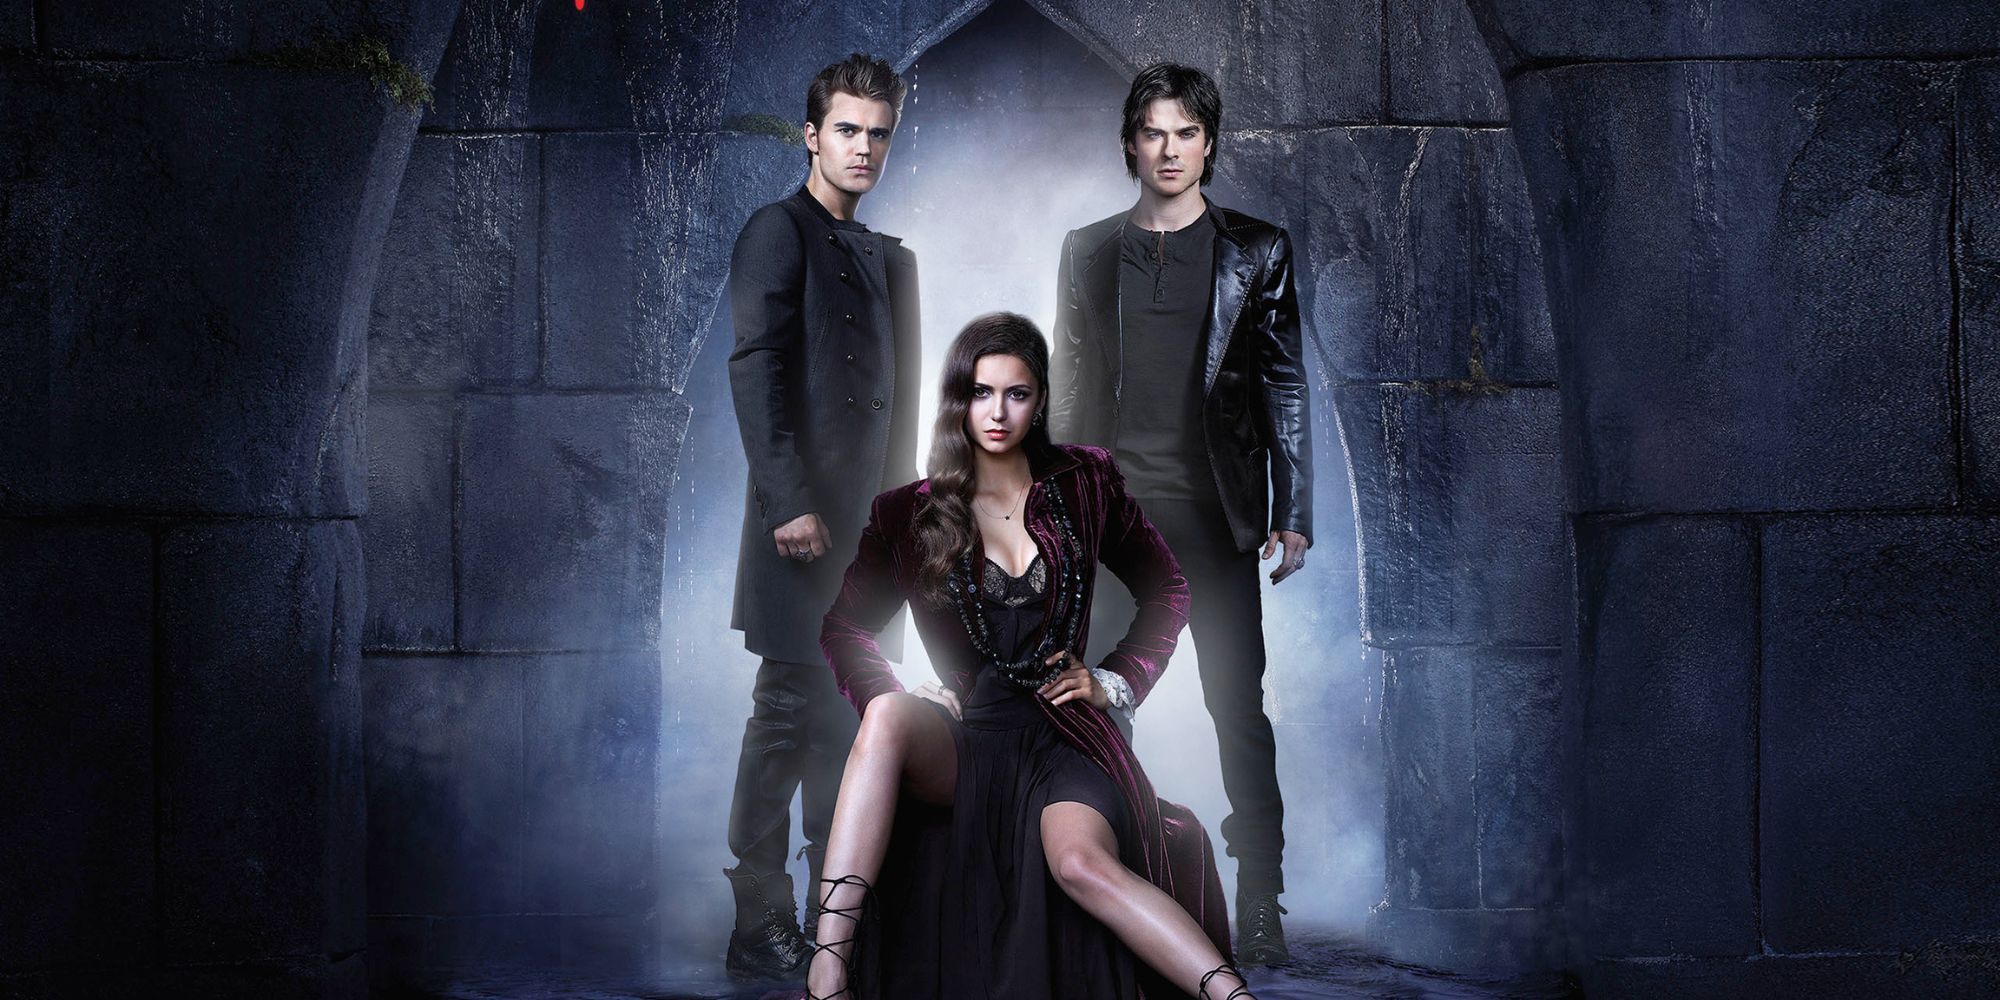 Damon, Elena and Stefan from The Vampire Diaries standing together